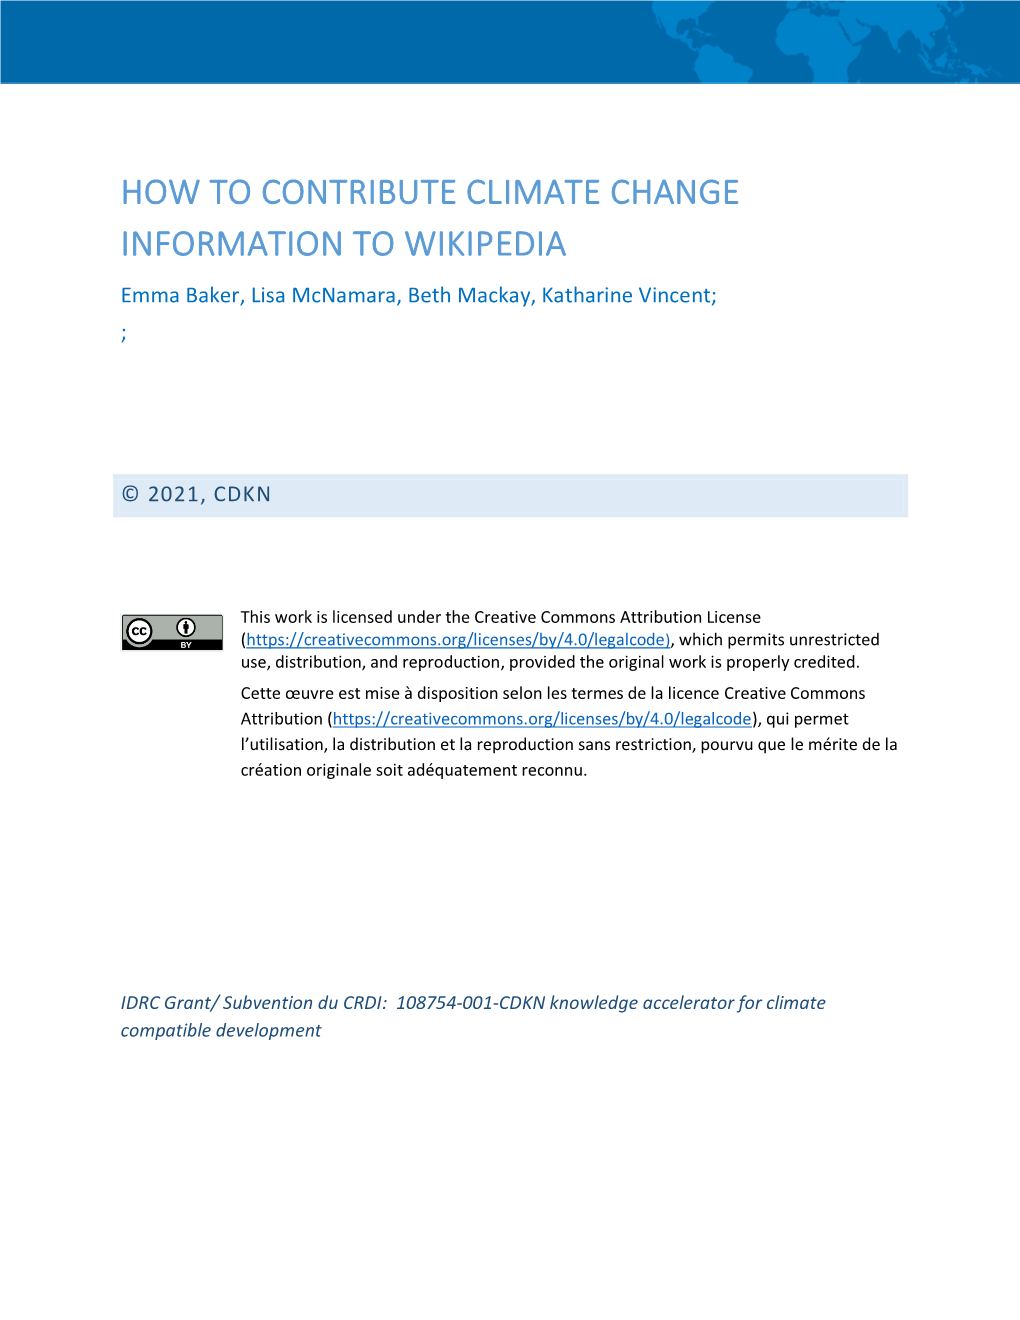 How to Contribute Climate Change Information to Wikipedia : a Guide